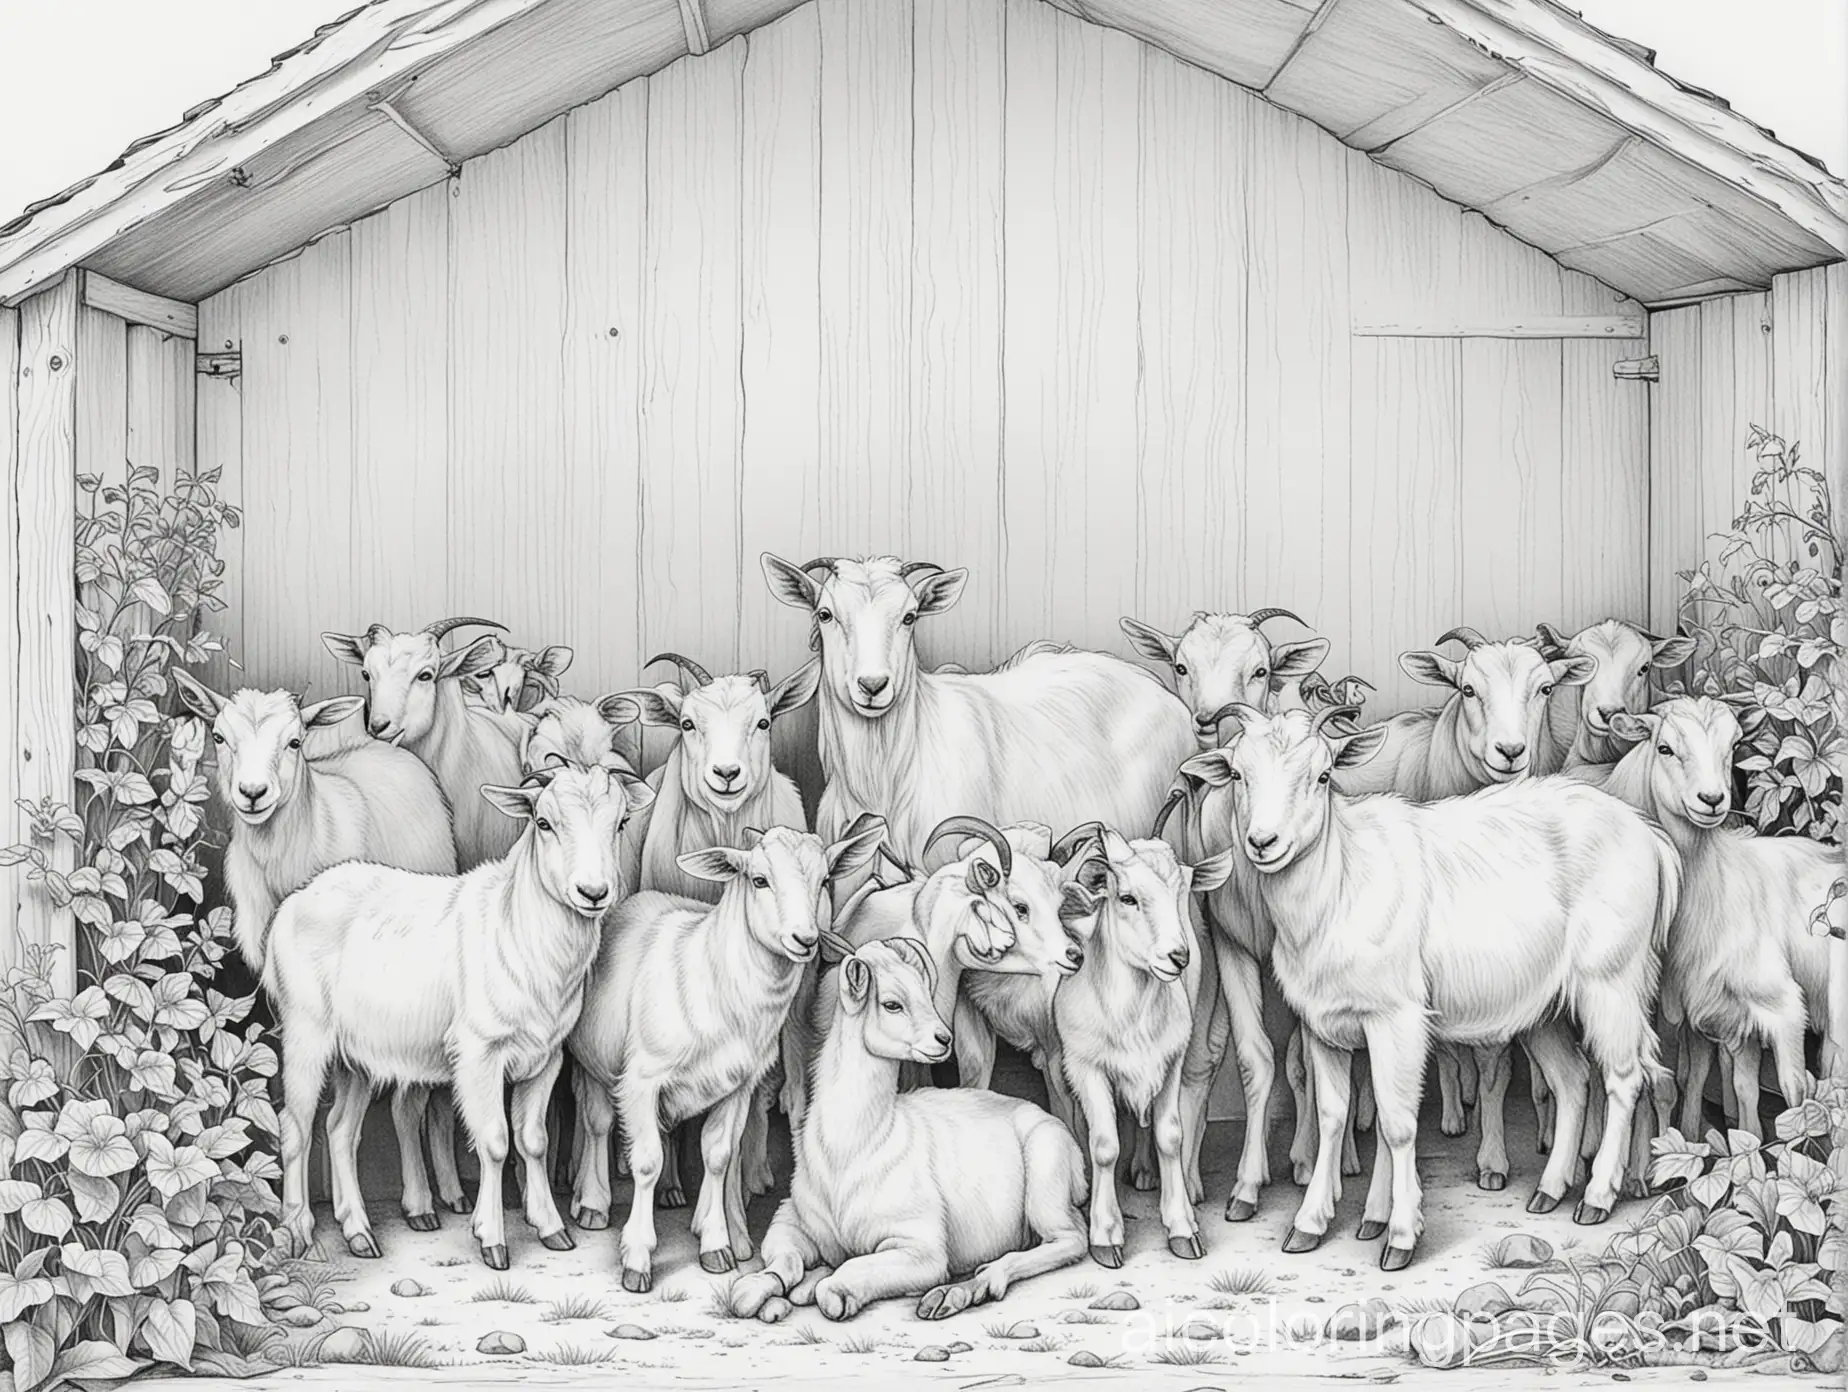 goats in their shed on one plan Coloring Page, black and white, line art, white background, Simplicity, Ample White Space. The background of the coloring page is plain white to make it easy for young children to color within the lines. The outlines of all the subjects are easy to distinguish, making it simple for kids to color without too much difficulty, Coloring Page, black and white, line art, white background, Simplicity, Ample White Space. The background of the coloring page is plain white to make it easy for young children to color within the lines. The outlines of all the subjects are easy to distinguish, making it simple for kids to color without too much difficulty